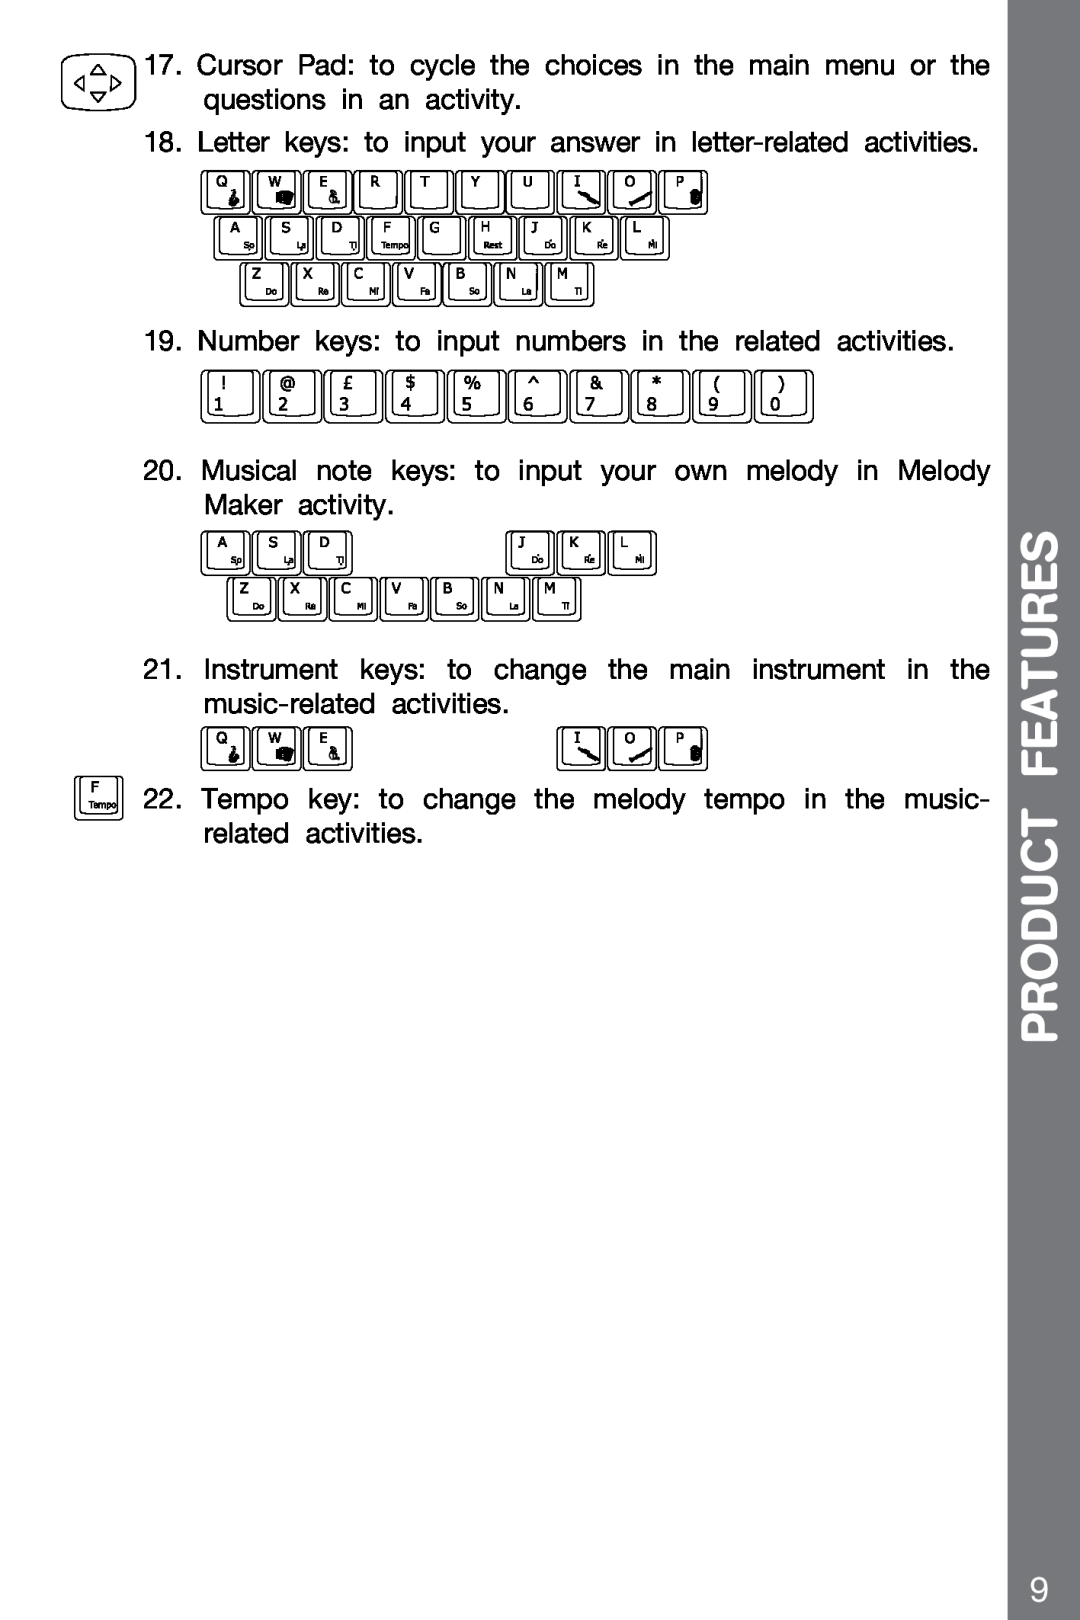 VTech 91-002136-014-000 user manual Product Features, Letter keys to input your answer in letter-related activities 